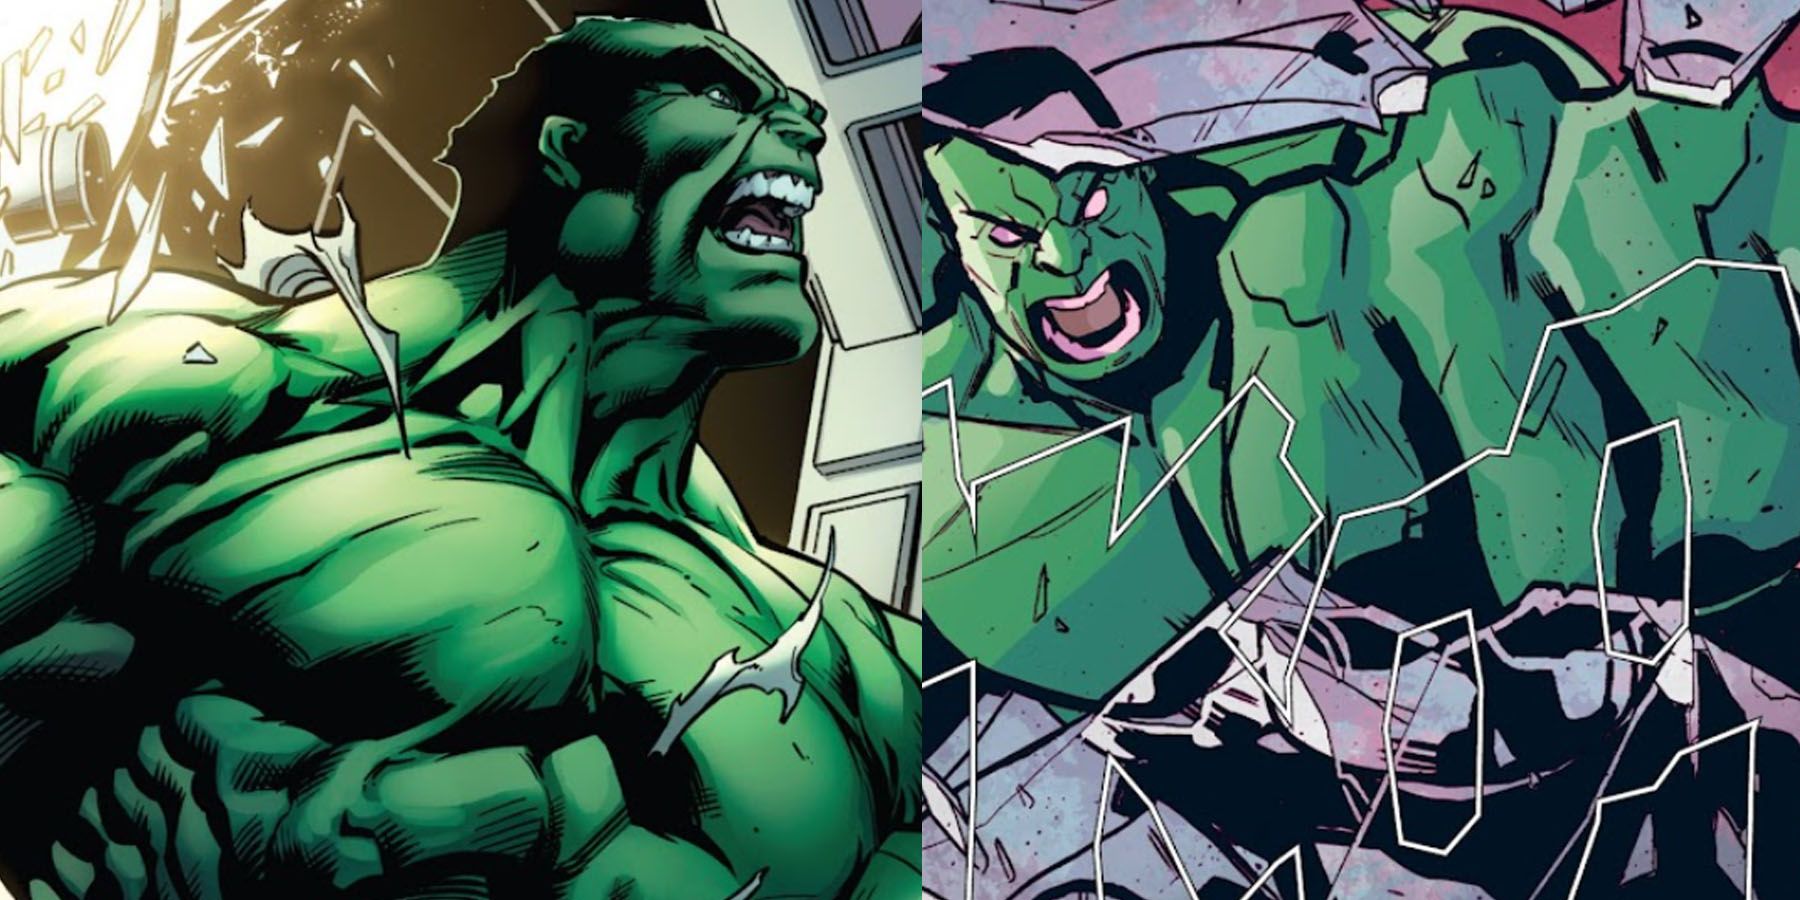 X Most Impressive Things The Hulk Has Done In Marvel Comics